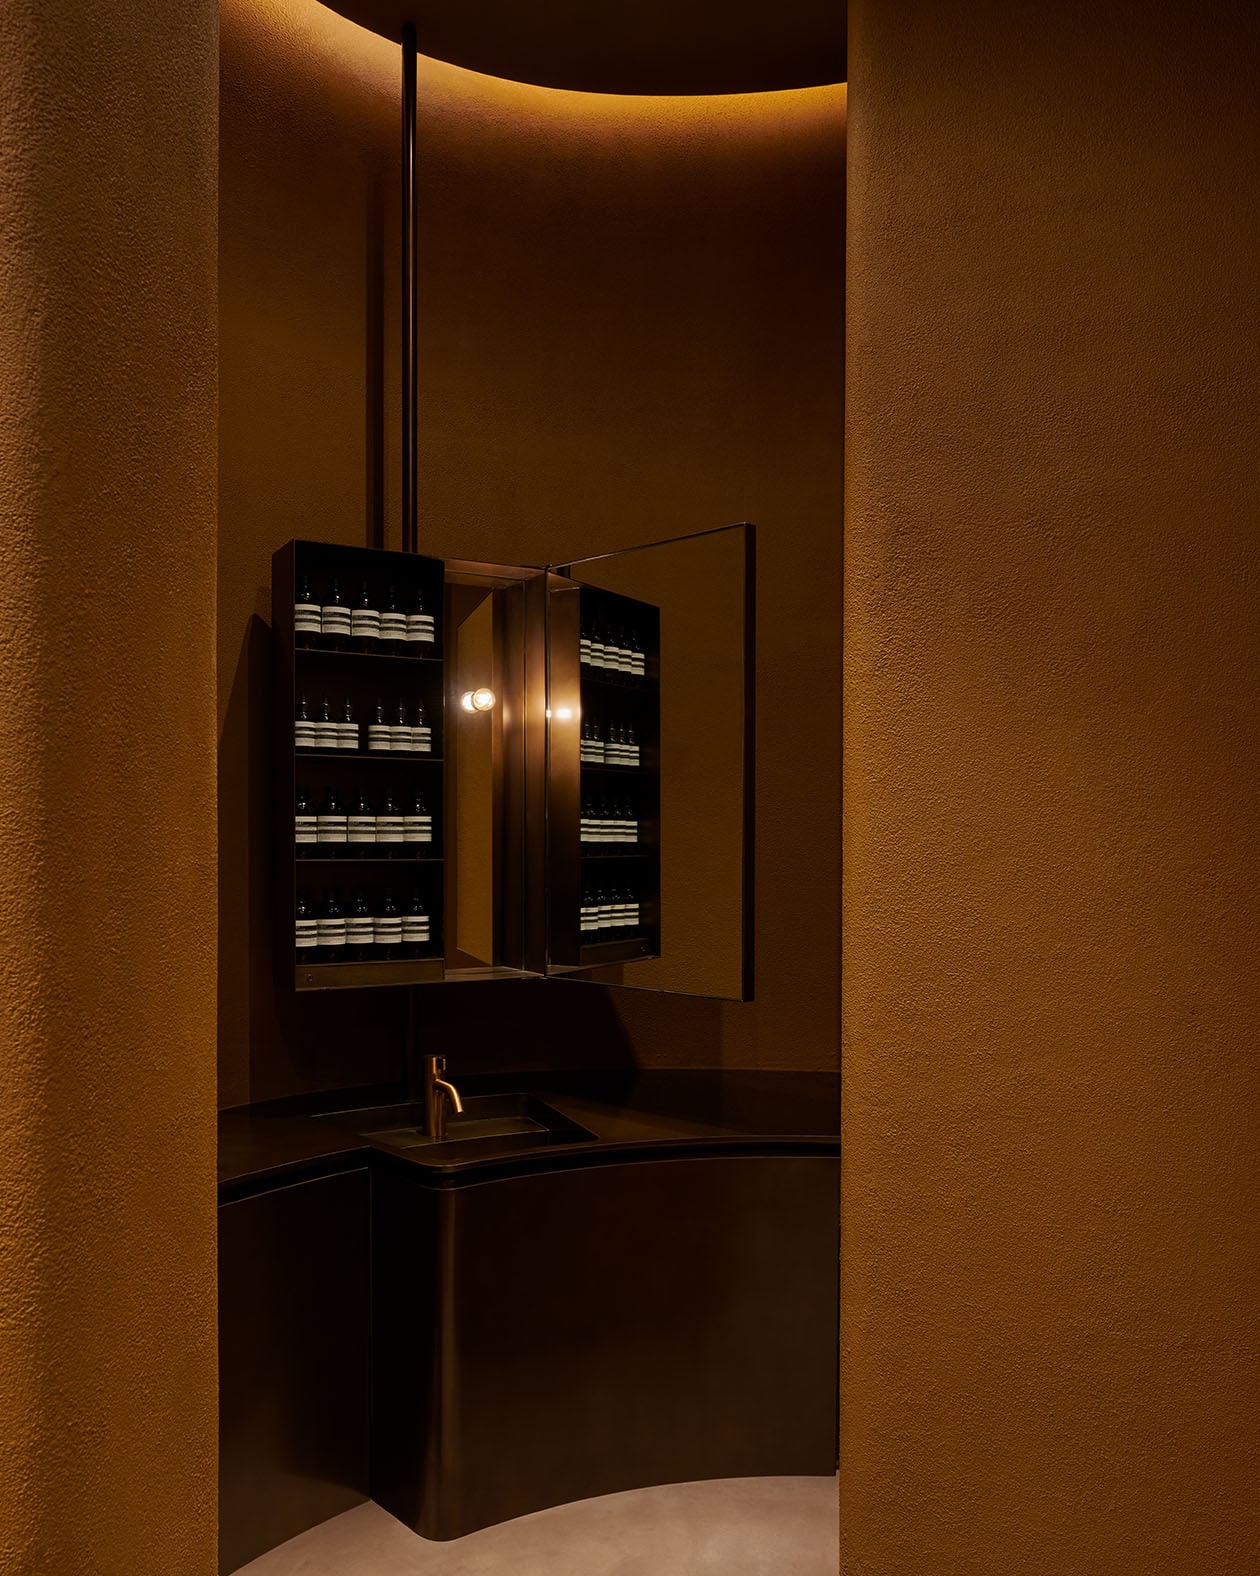 Recessed lighting on the shelves impart a tranquil glow. 